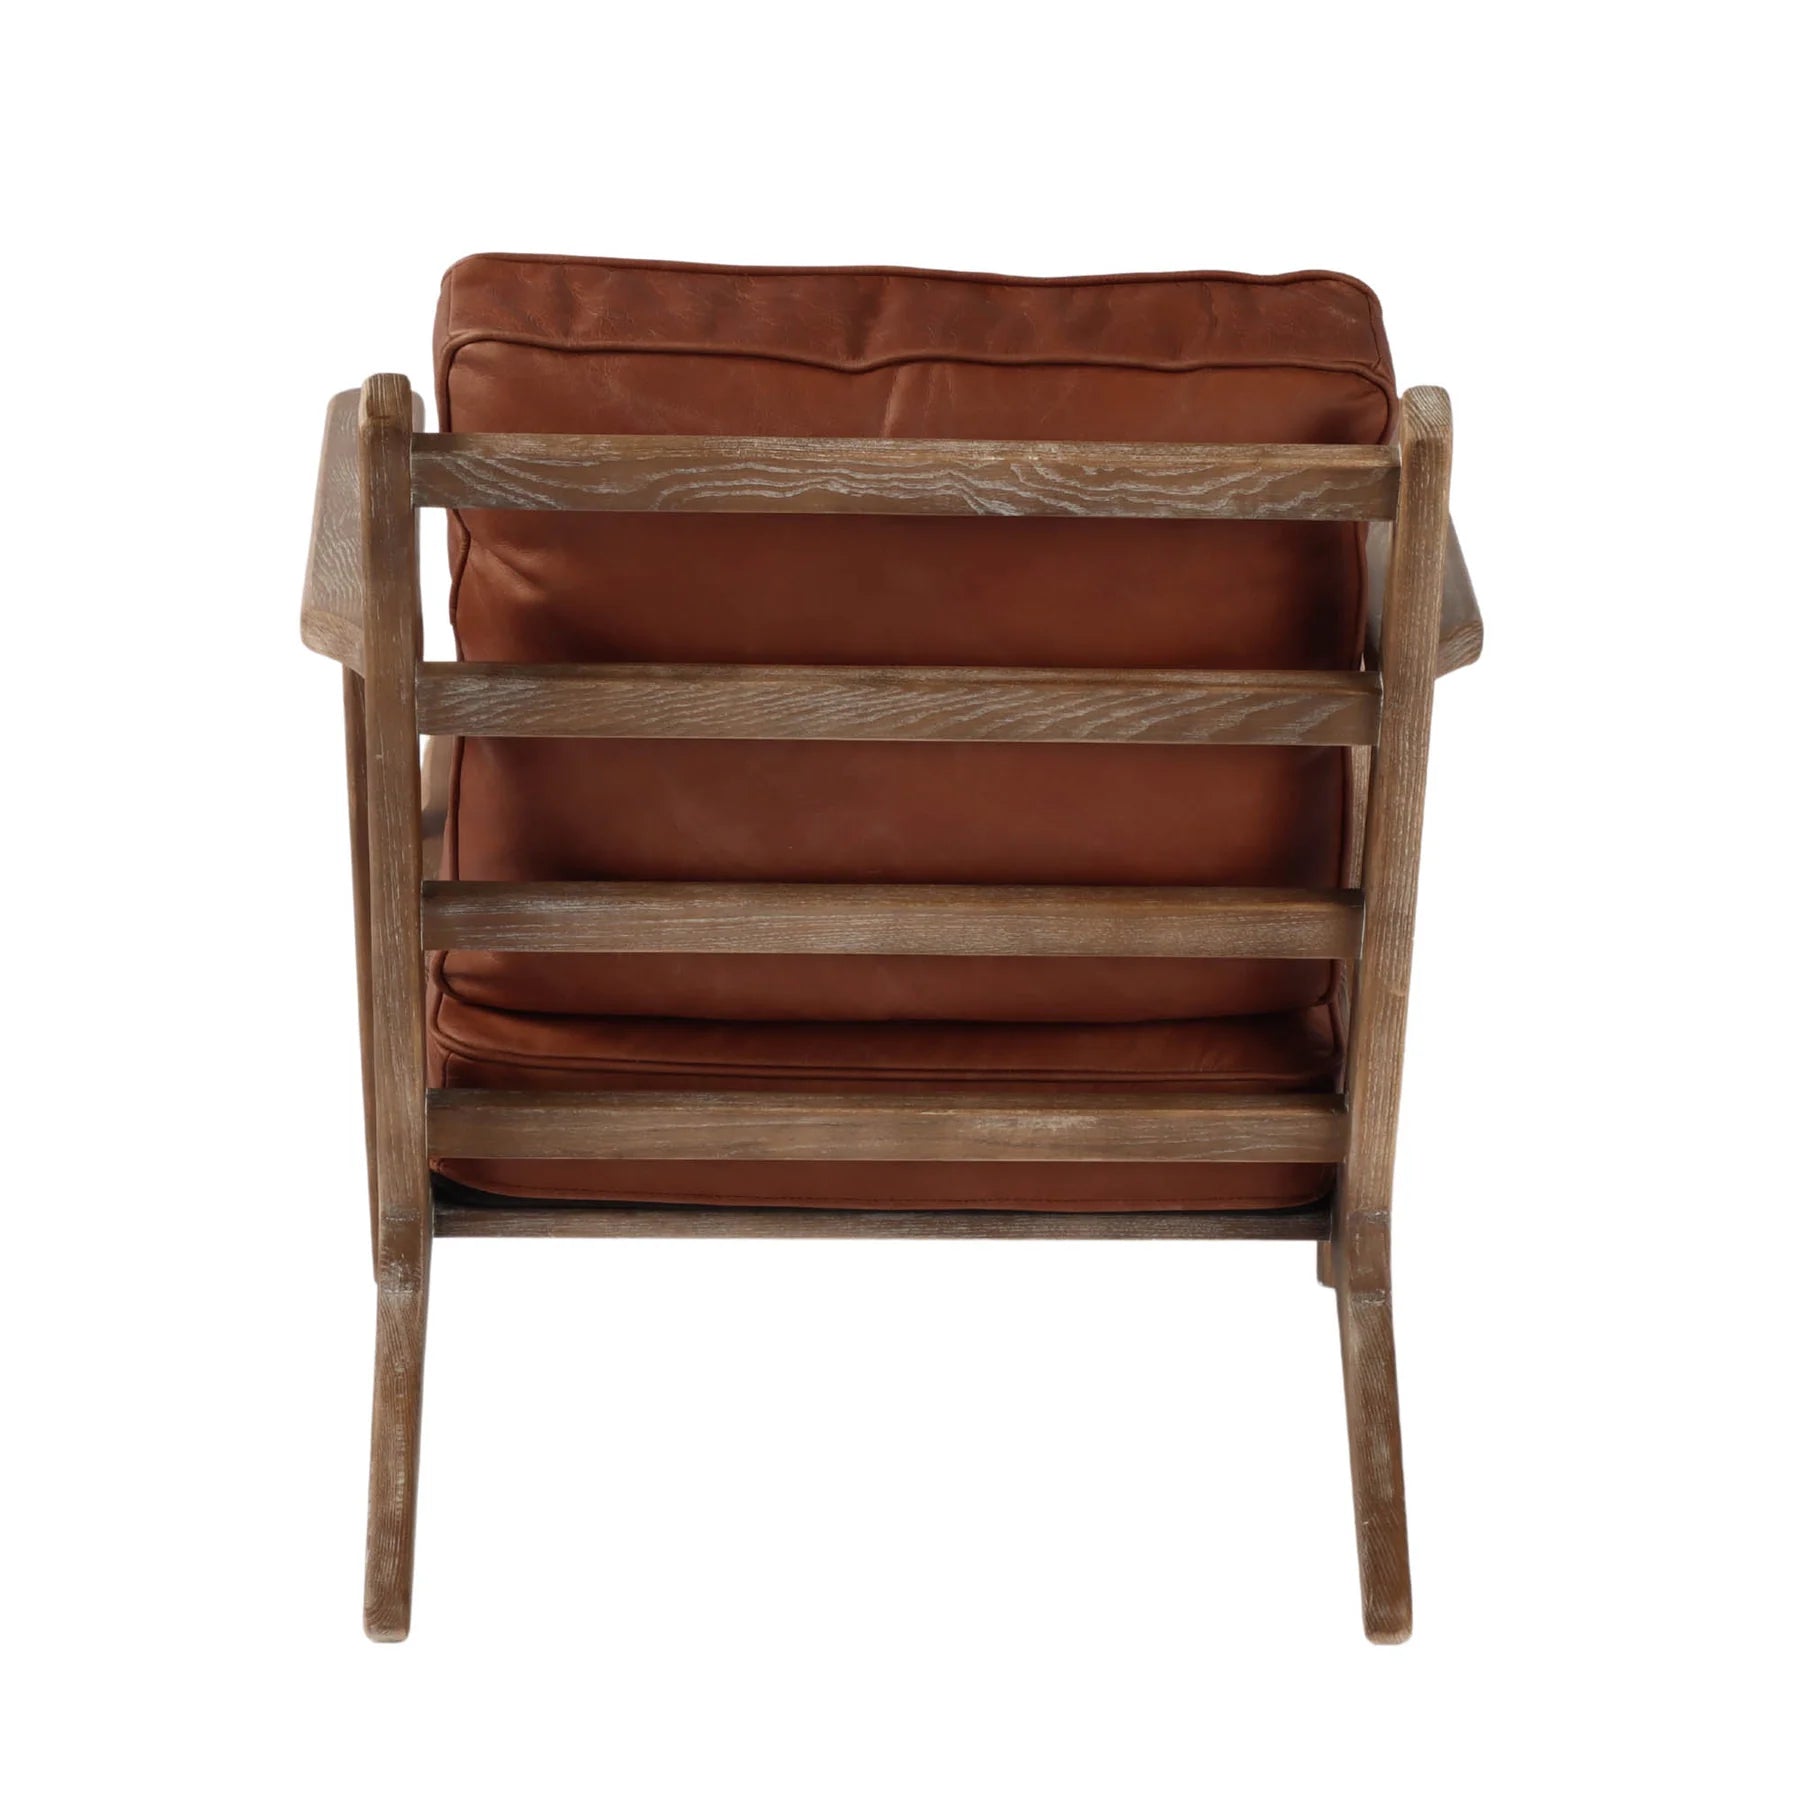 JUNIOR Leather Arm Chair